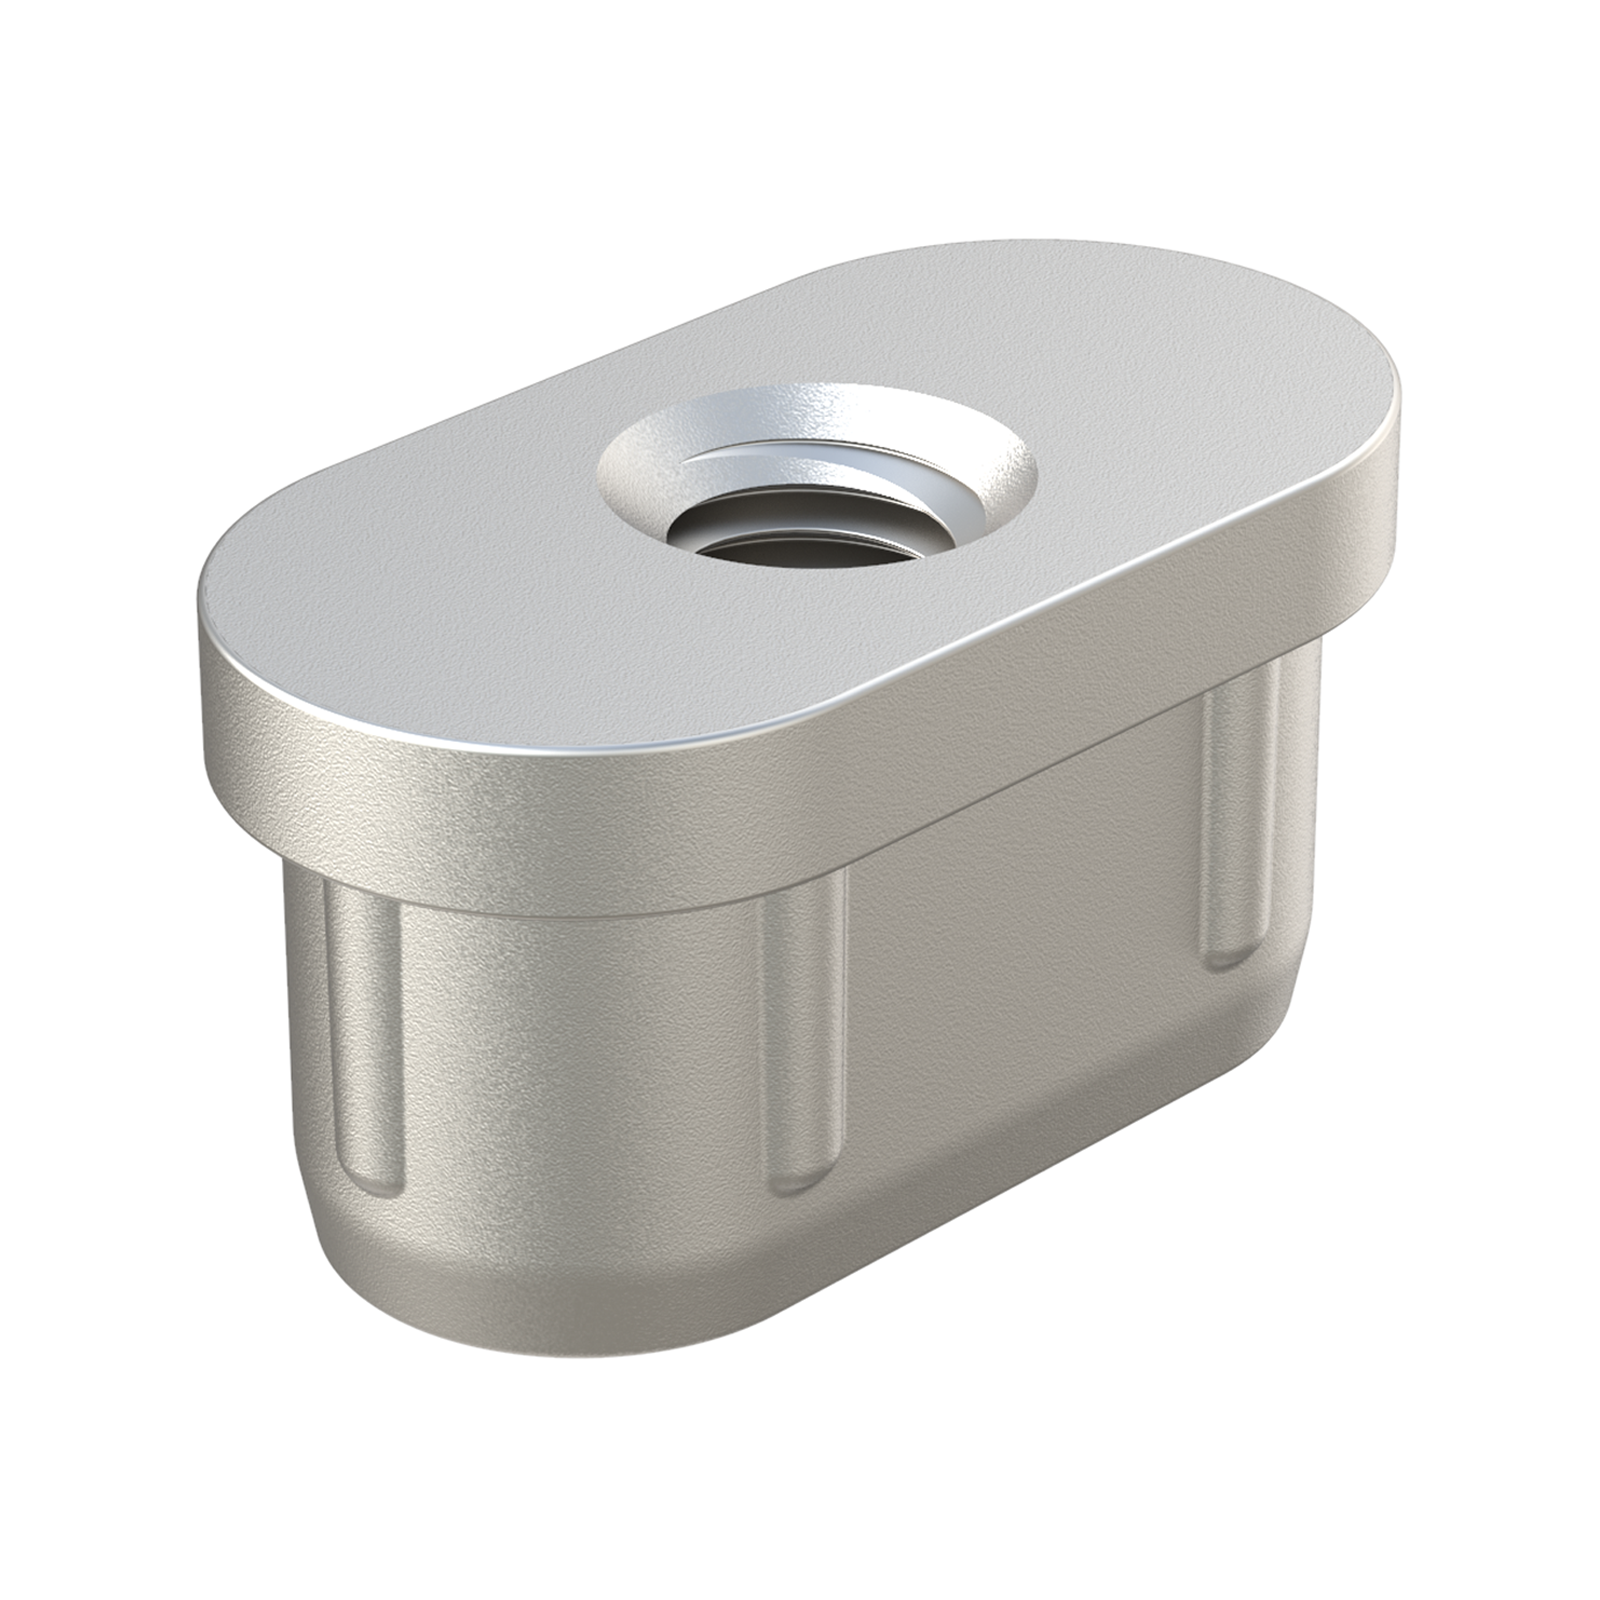 Our threaded insert is manufactured in Zamak alloy for square tubes. It is also available for round tubes: LJMR, rectangular tubes: LJMZ and for oval tubes: LJMO.